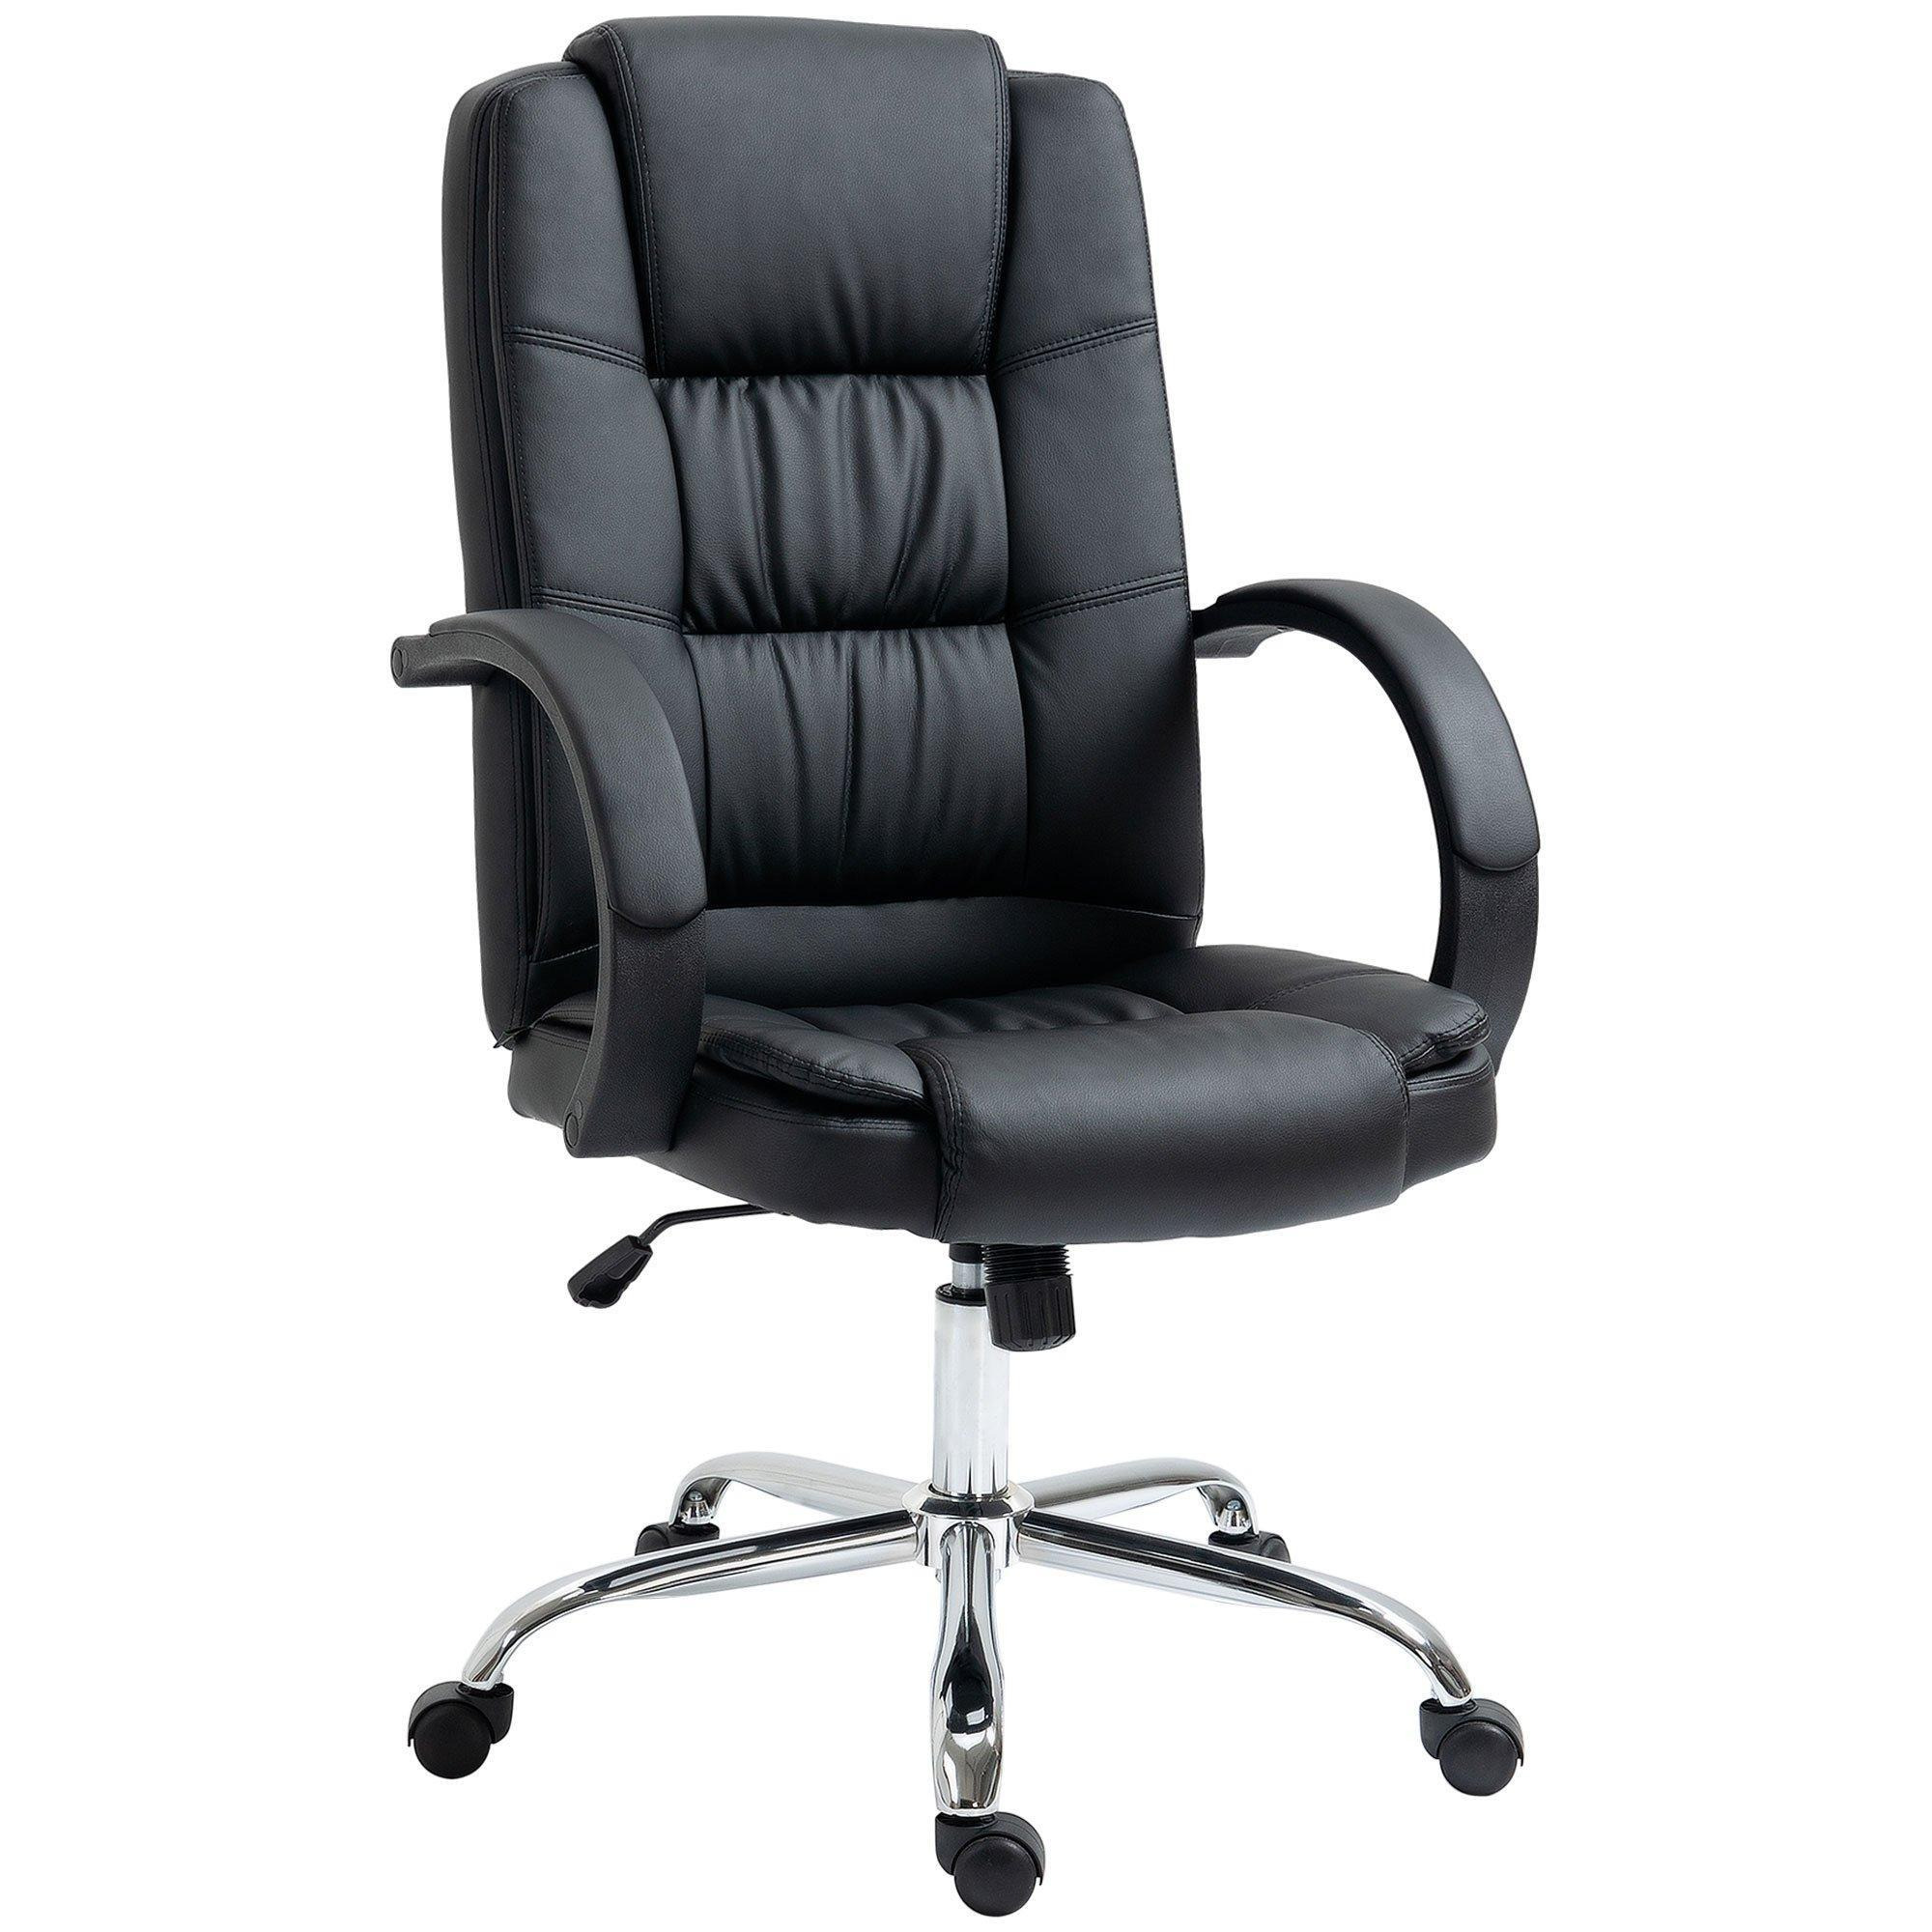 PU Leather Executive Office Chair Back Height Adjustable Desk Chair - image 1